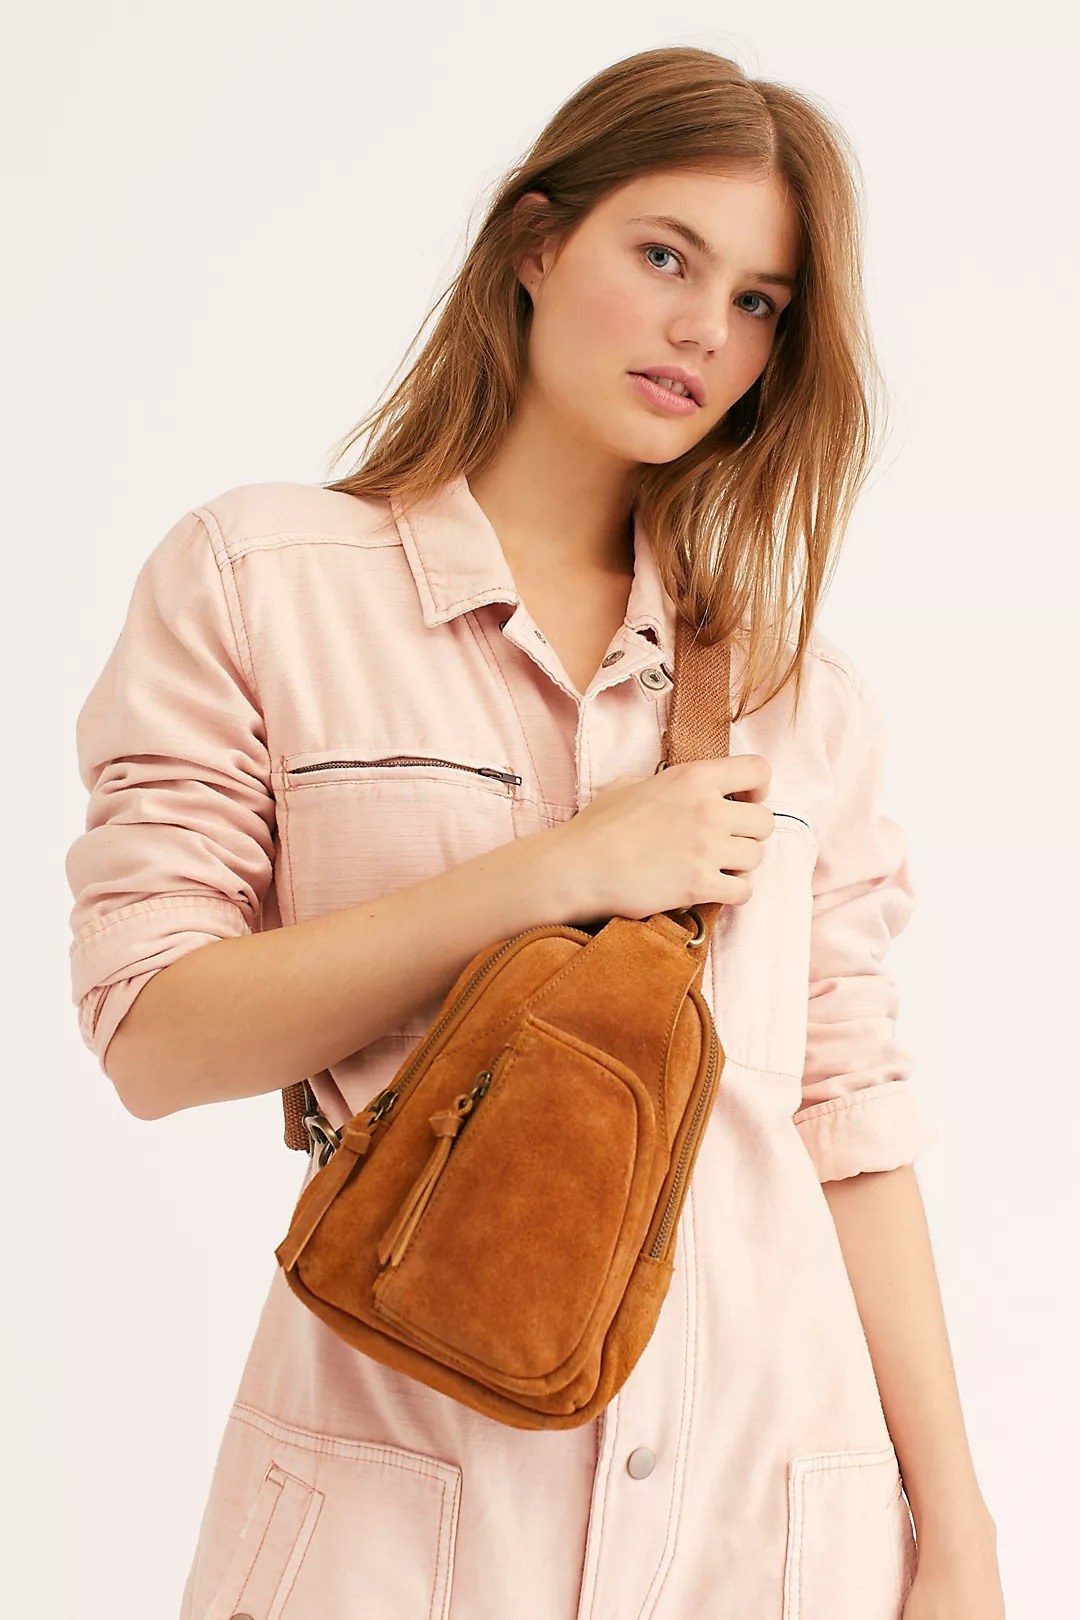 Model wearing camel suede looking bag, with two zippers